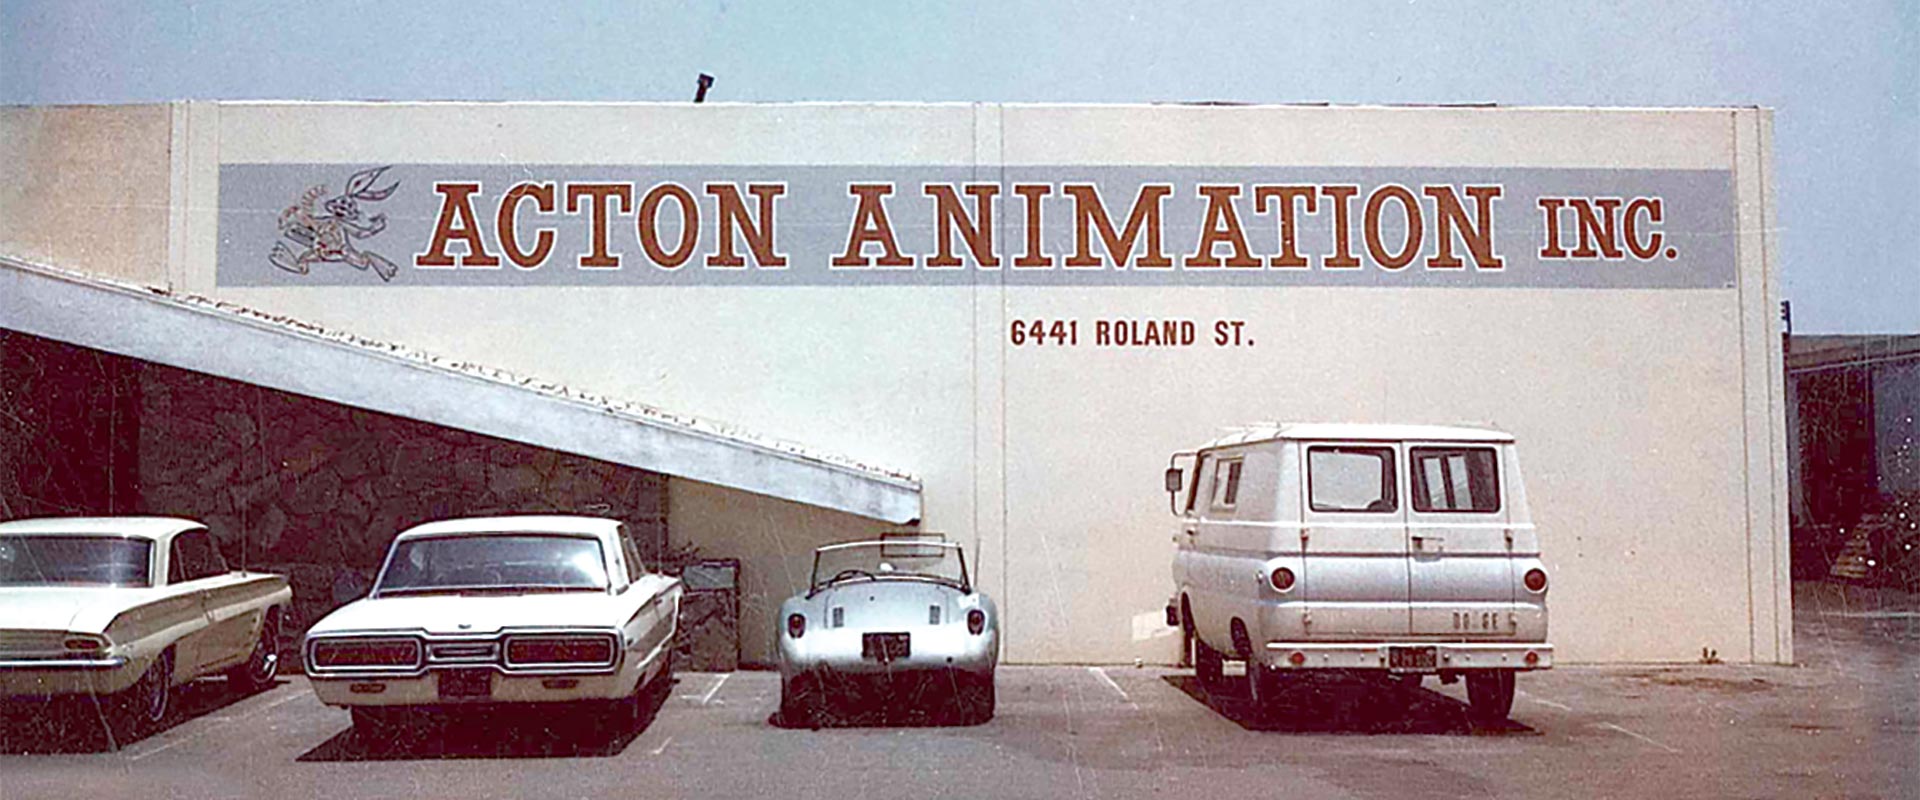 Acton Animation Forte Construction History